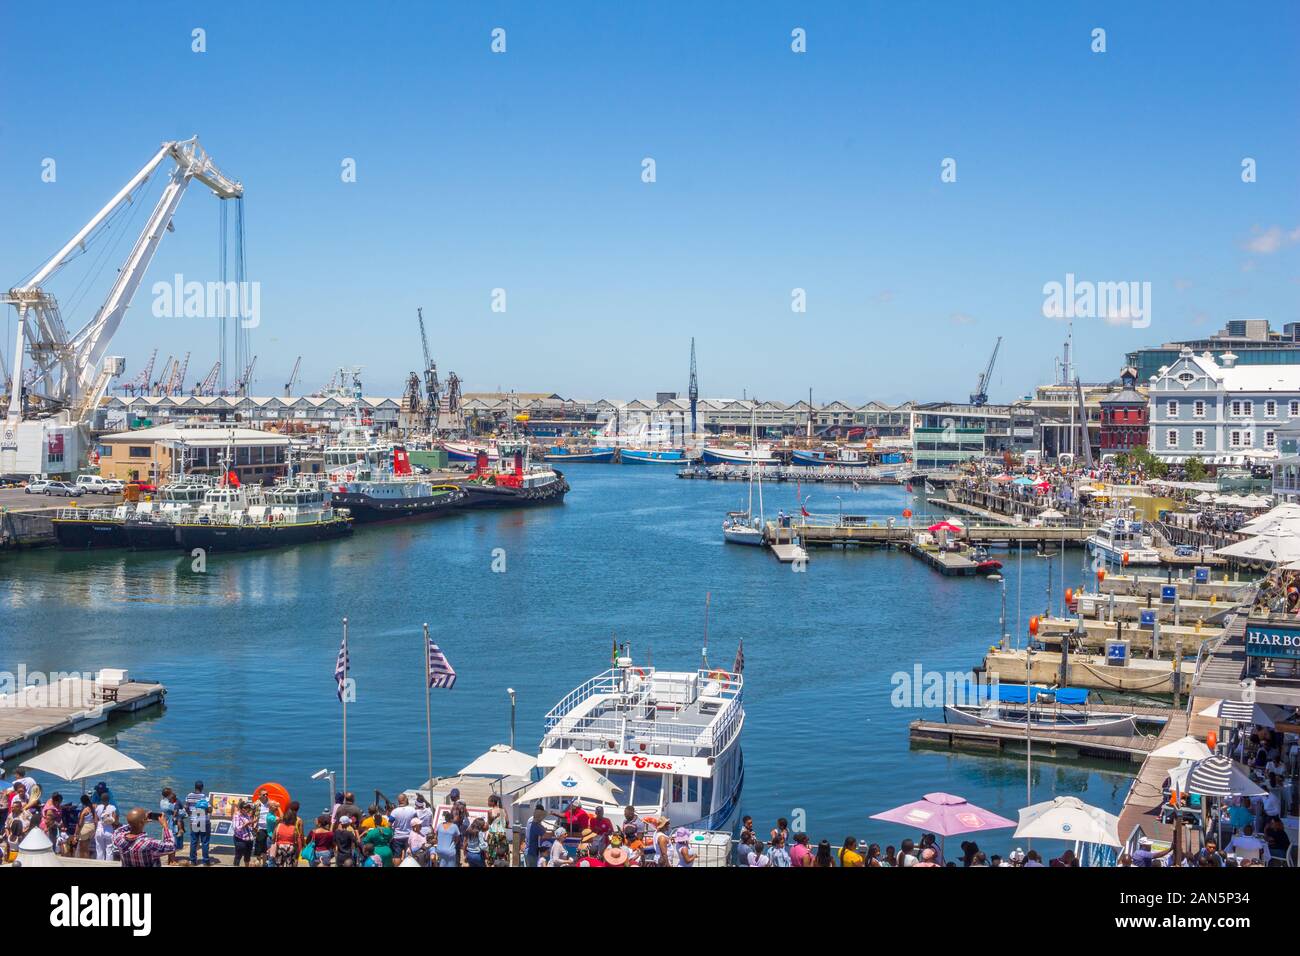 CAPE TOWN , SOUTH AFRICA - 01 JANUARY 2020: V & A Waterfront with many tourists onNew Years day at the Cape Town harbour with Old Port Captain's build Stock Photo